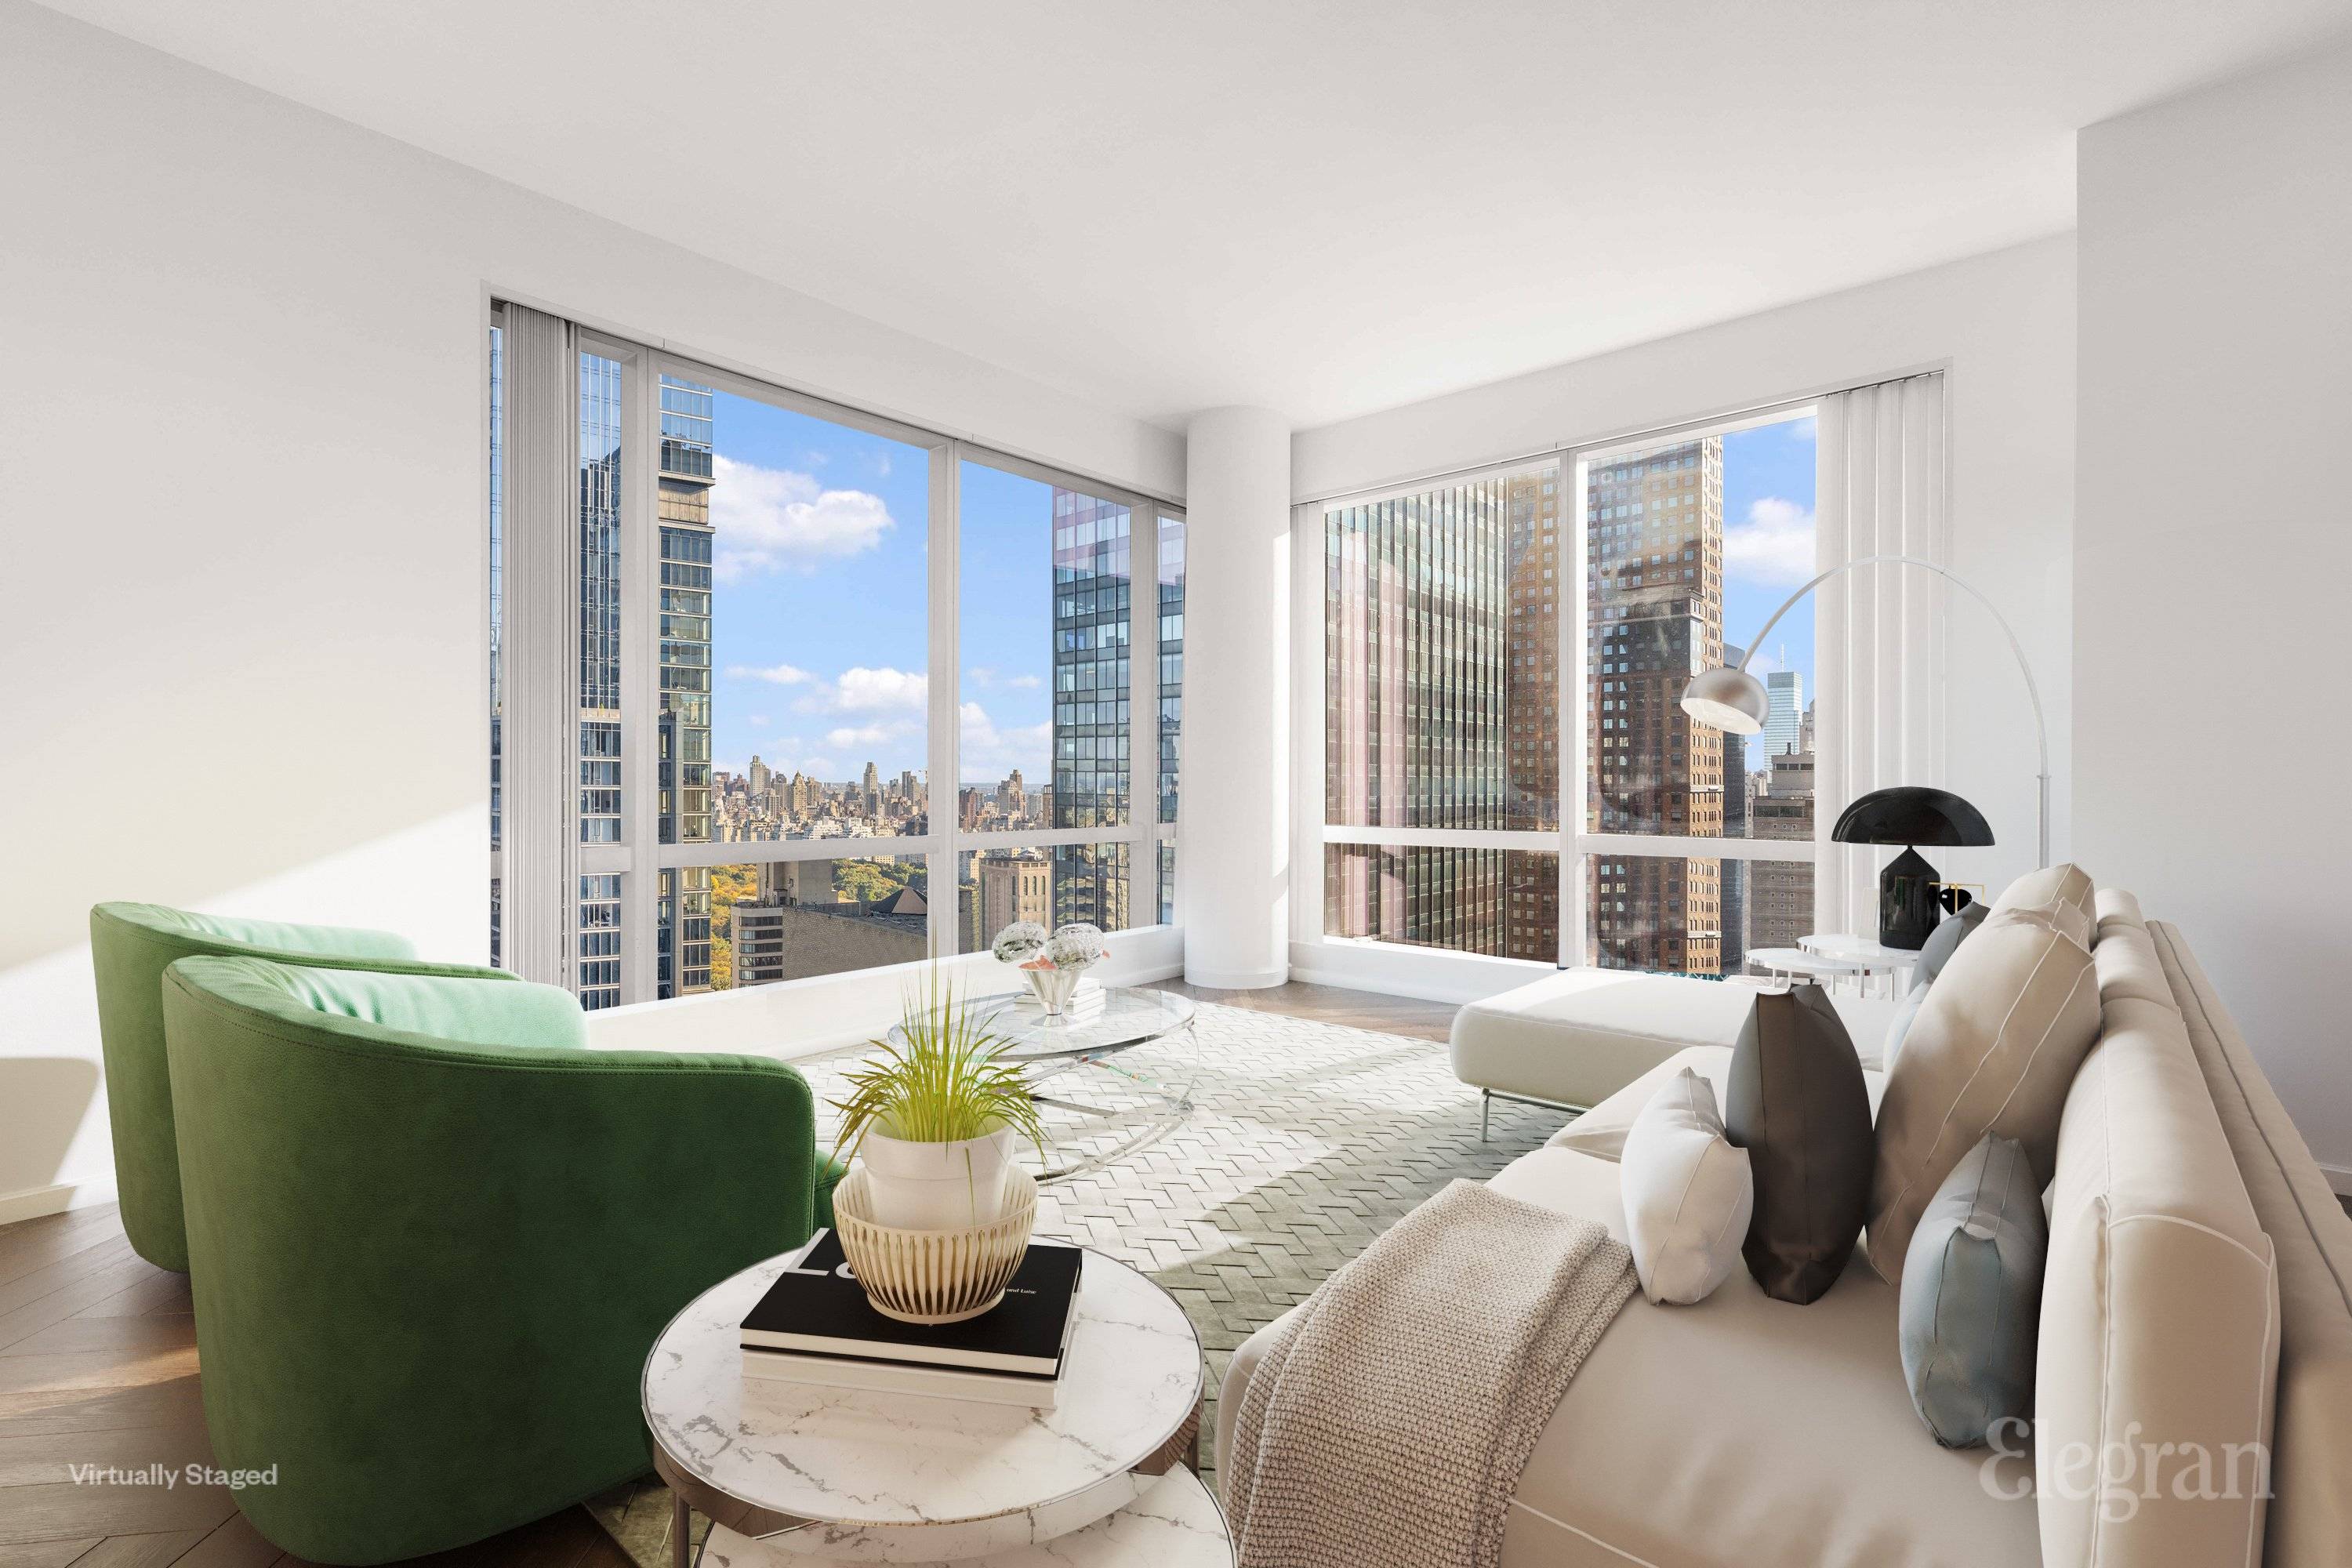 Iconic New York skyline and Luxury living at 230 W 56TH ST, APT 50B.